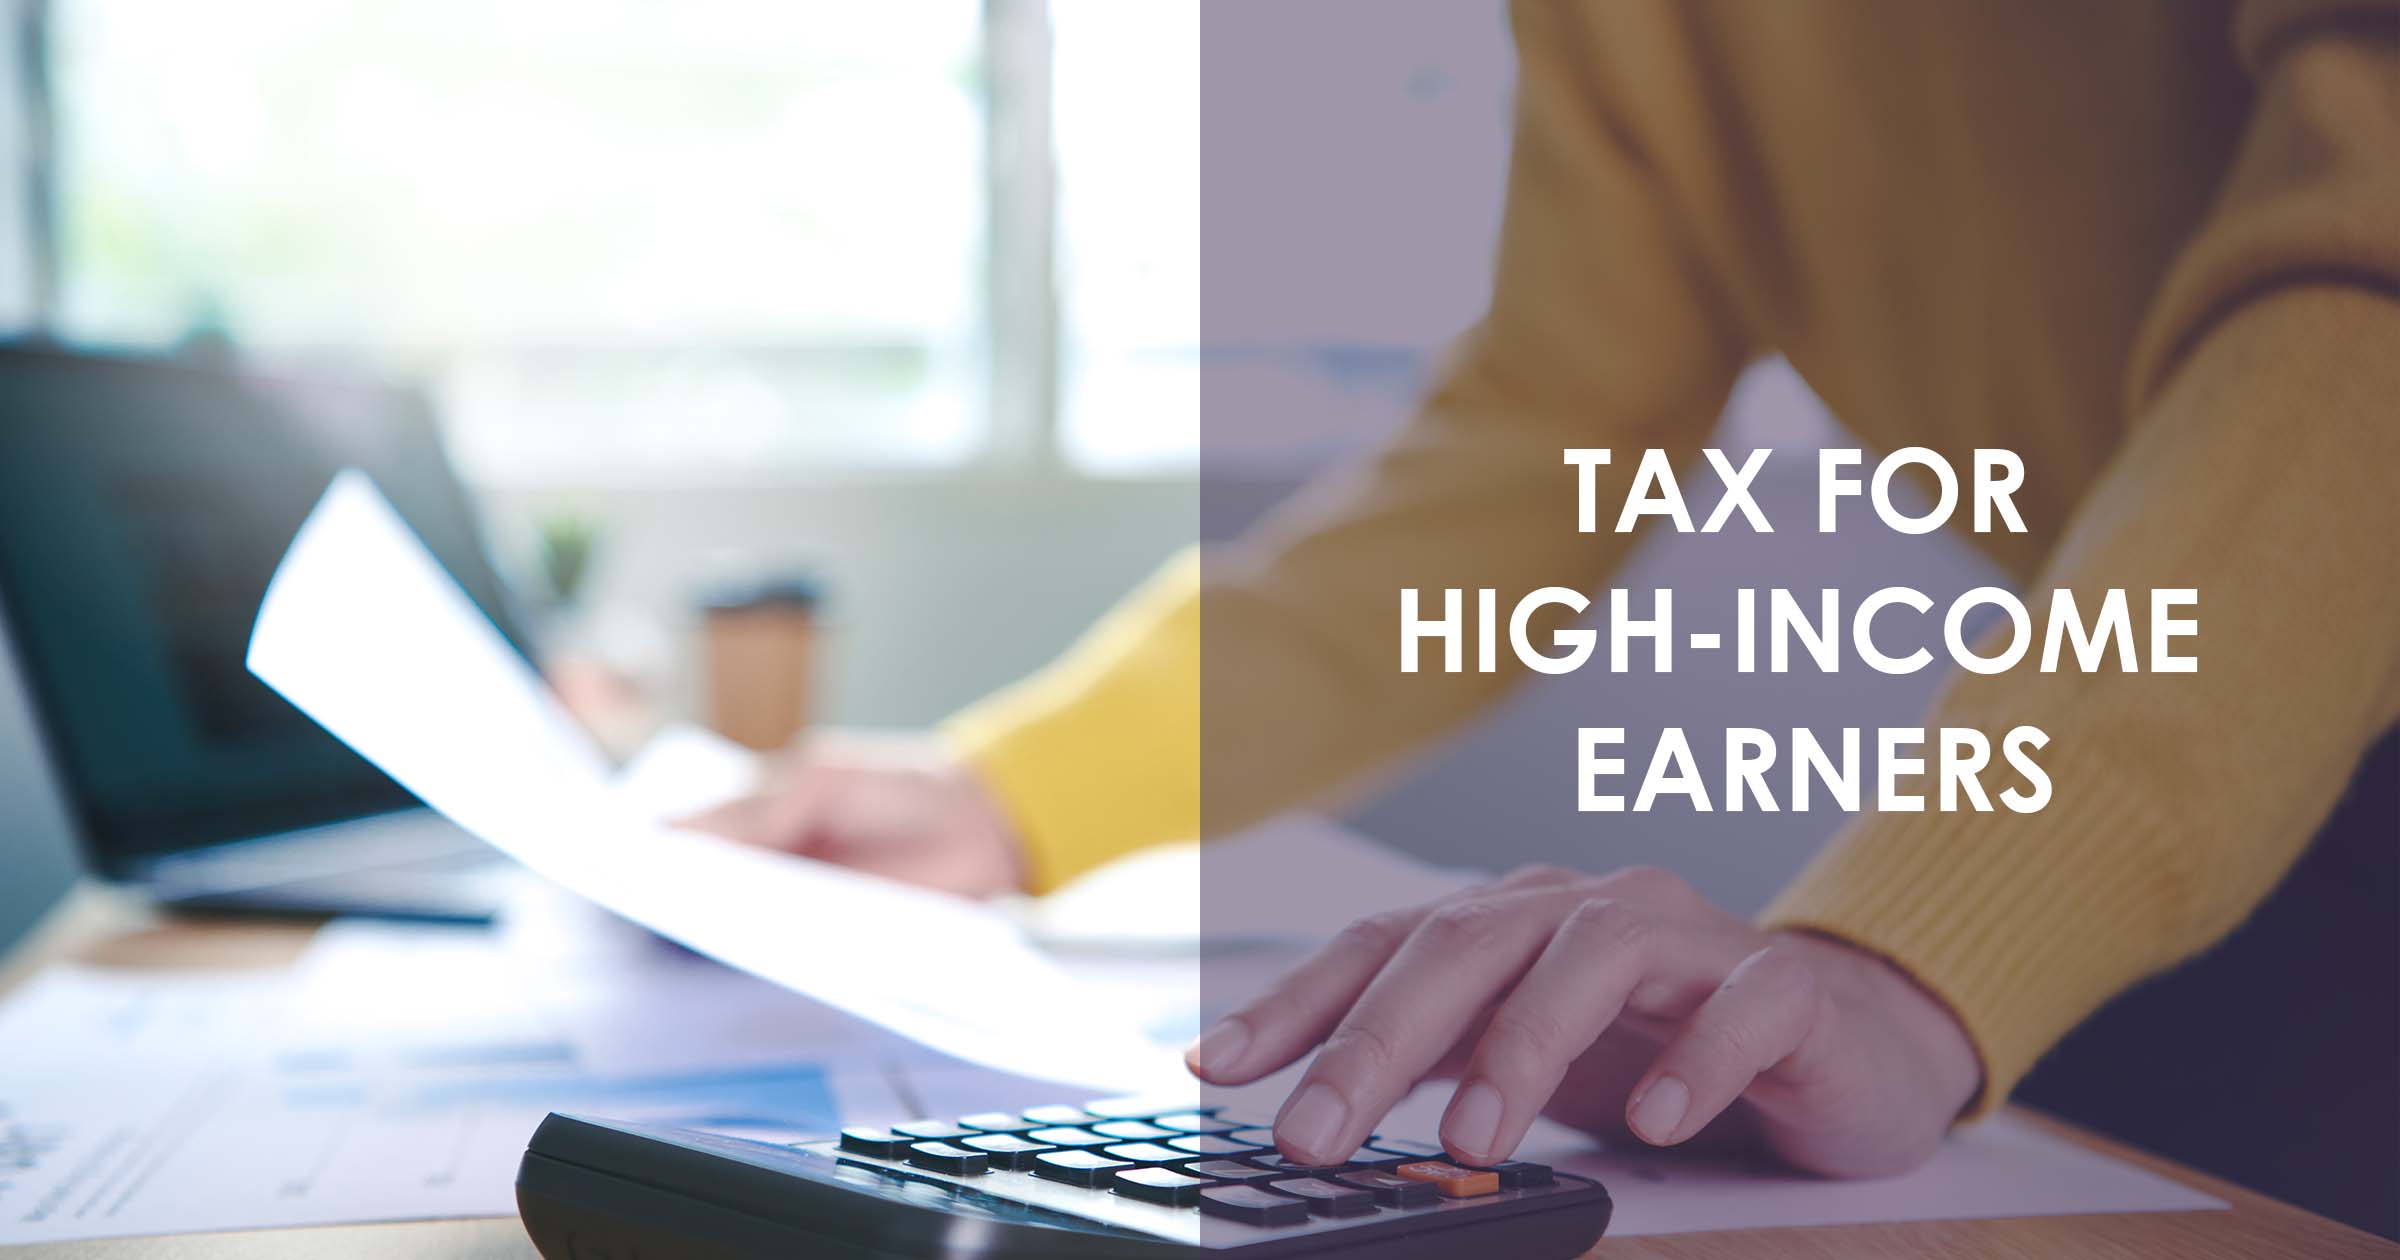 7-tax-reduction-strategies-for-high-income-earners-in-australia-craig